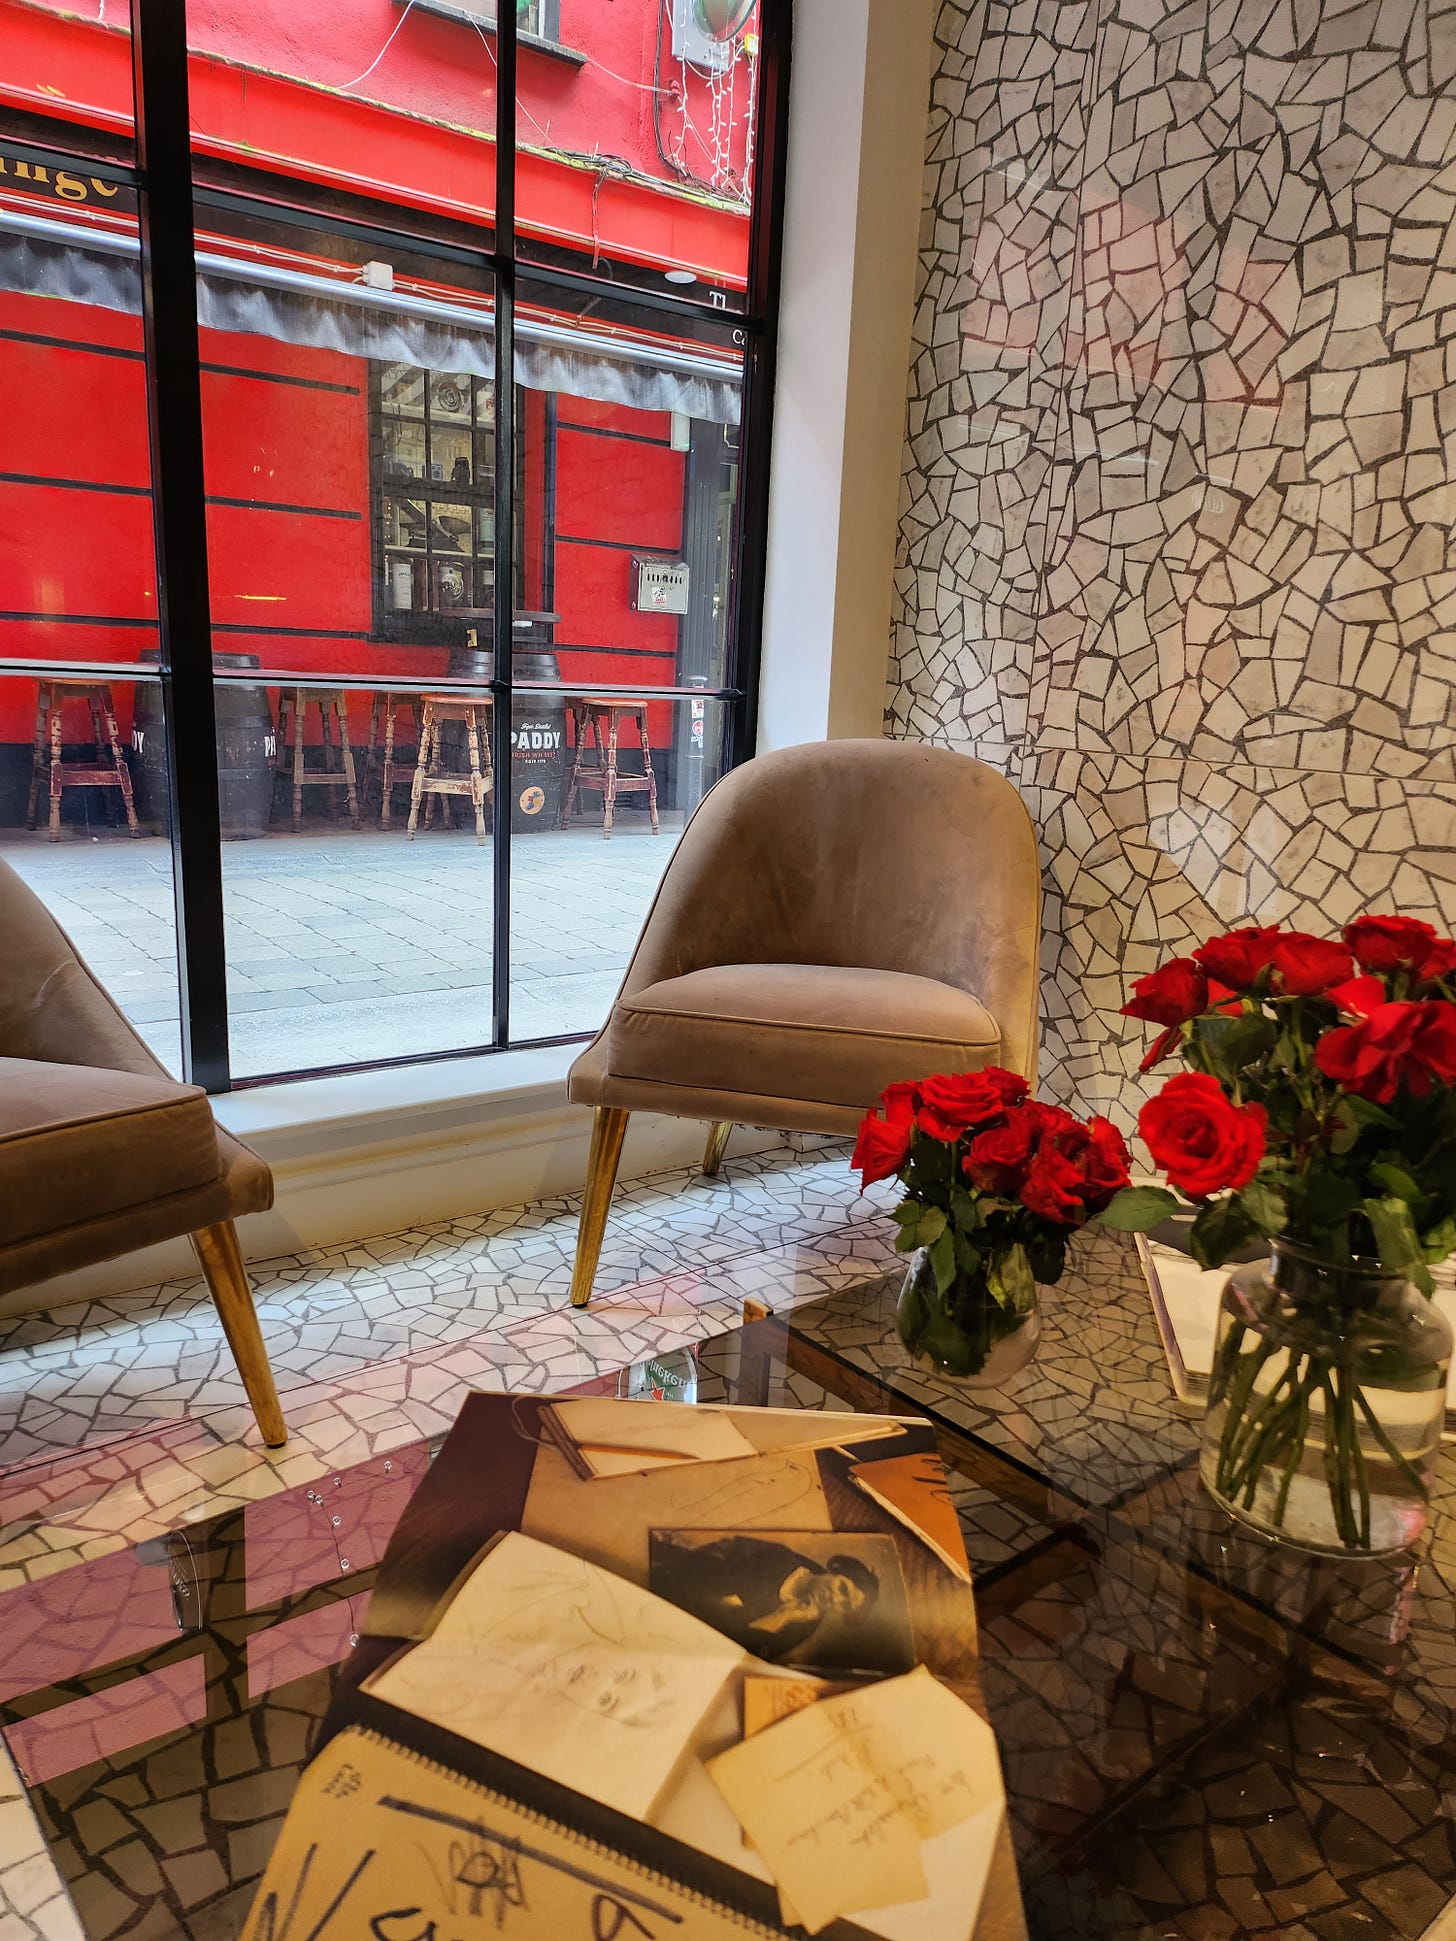 The view from inside The Hive. A table is filled with red roses and books, as the Bankers pub can be seen outside. 